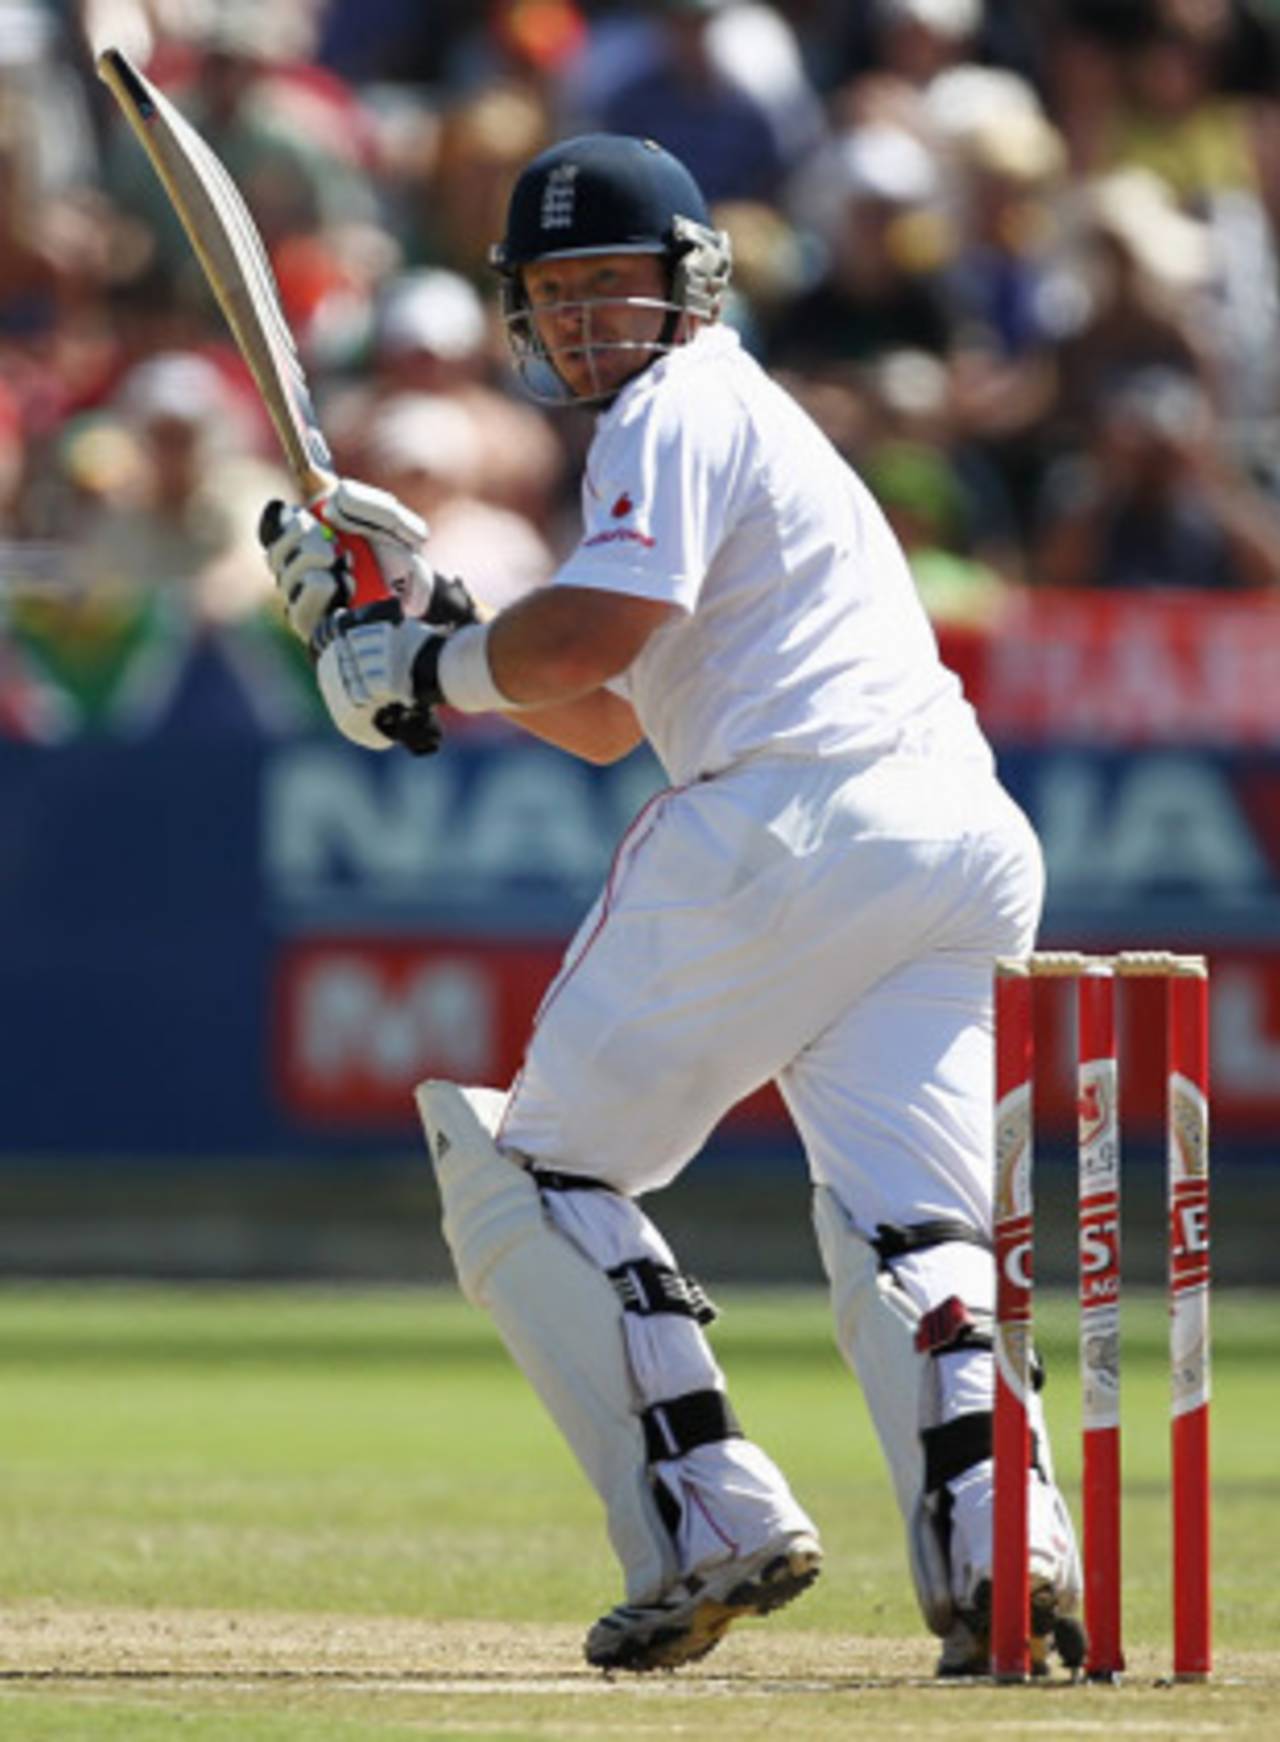 Ian Bell played nicely in a tough situation to keep England in contention, South Africa v England, 3rd Test, Cape Town, January 4, 2009